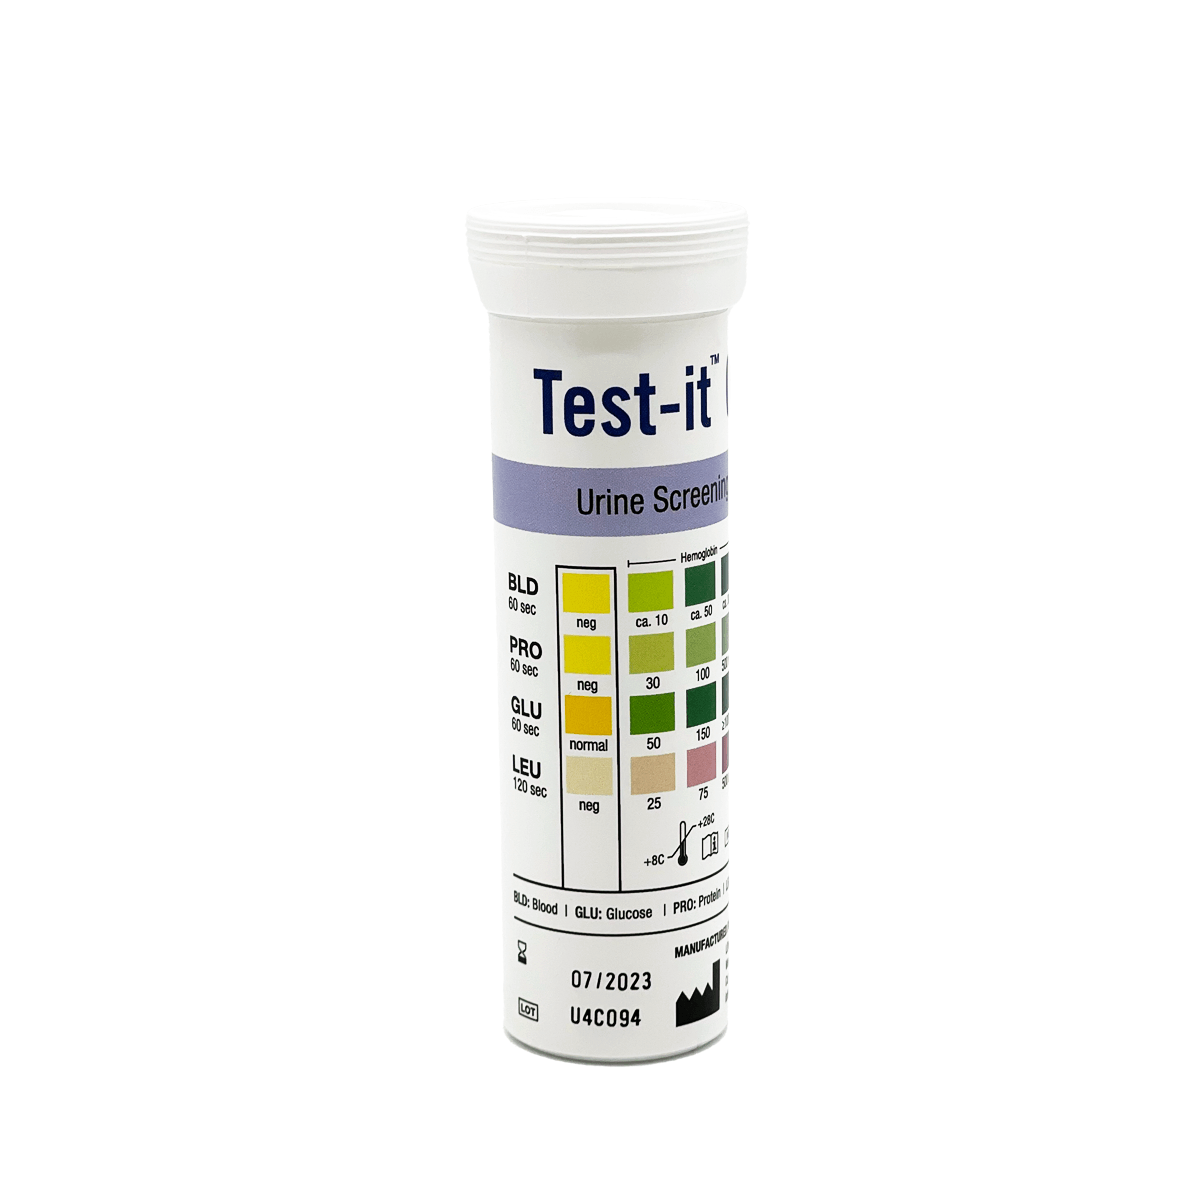 Test-it Canine - Urine Screening Test for Dogs - Homedoc